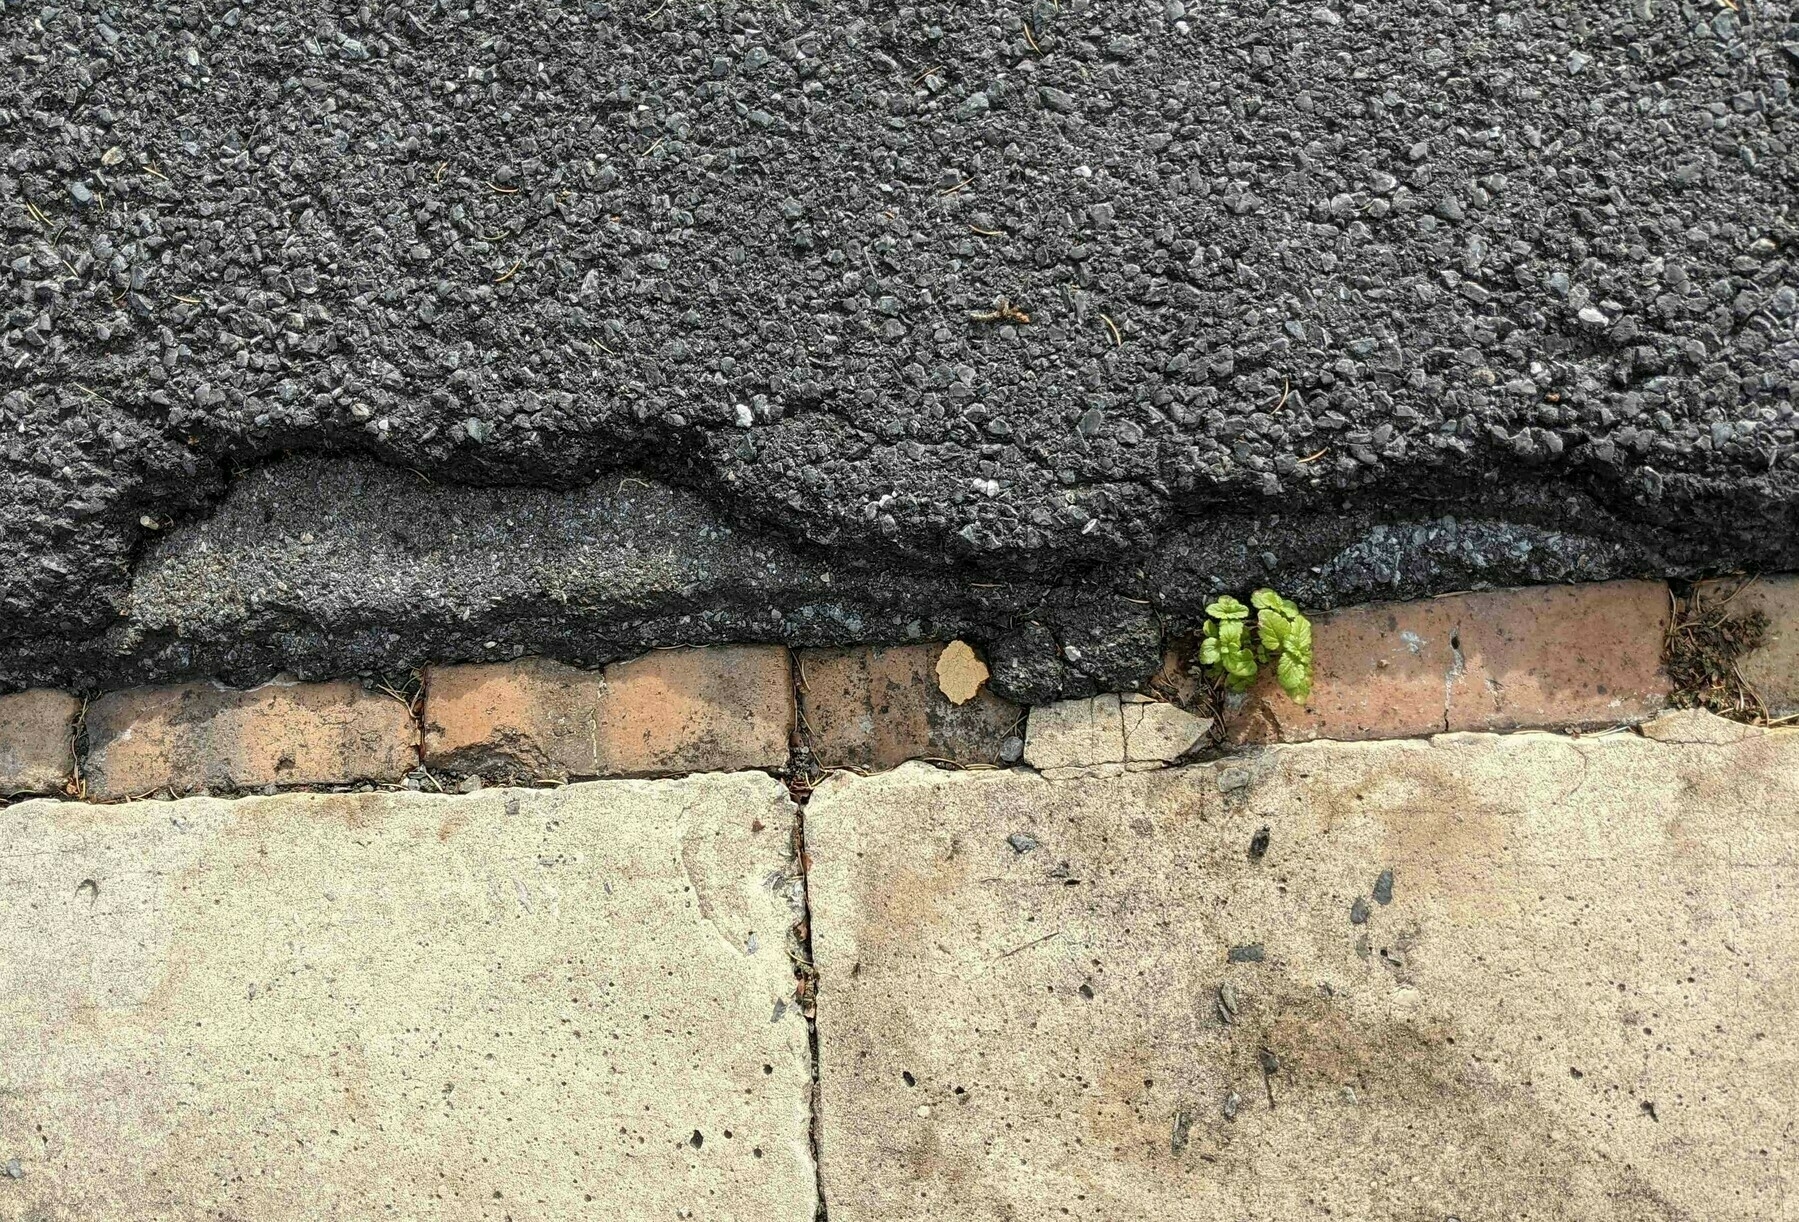 a small green plant grows in a gap on the edge of an asphalt road that reveals an older brick road below